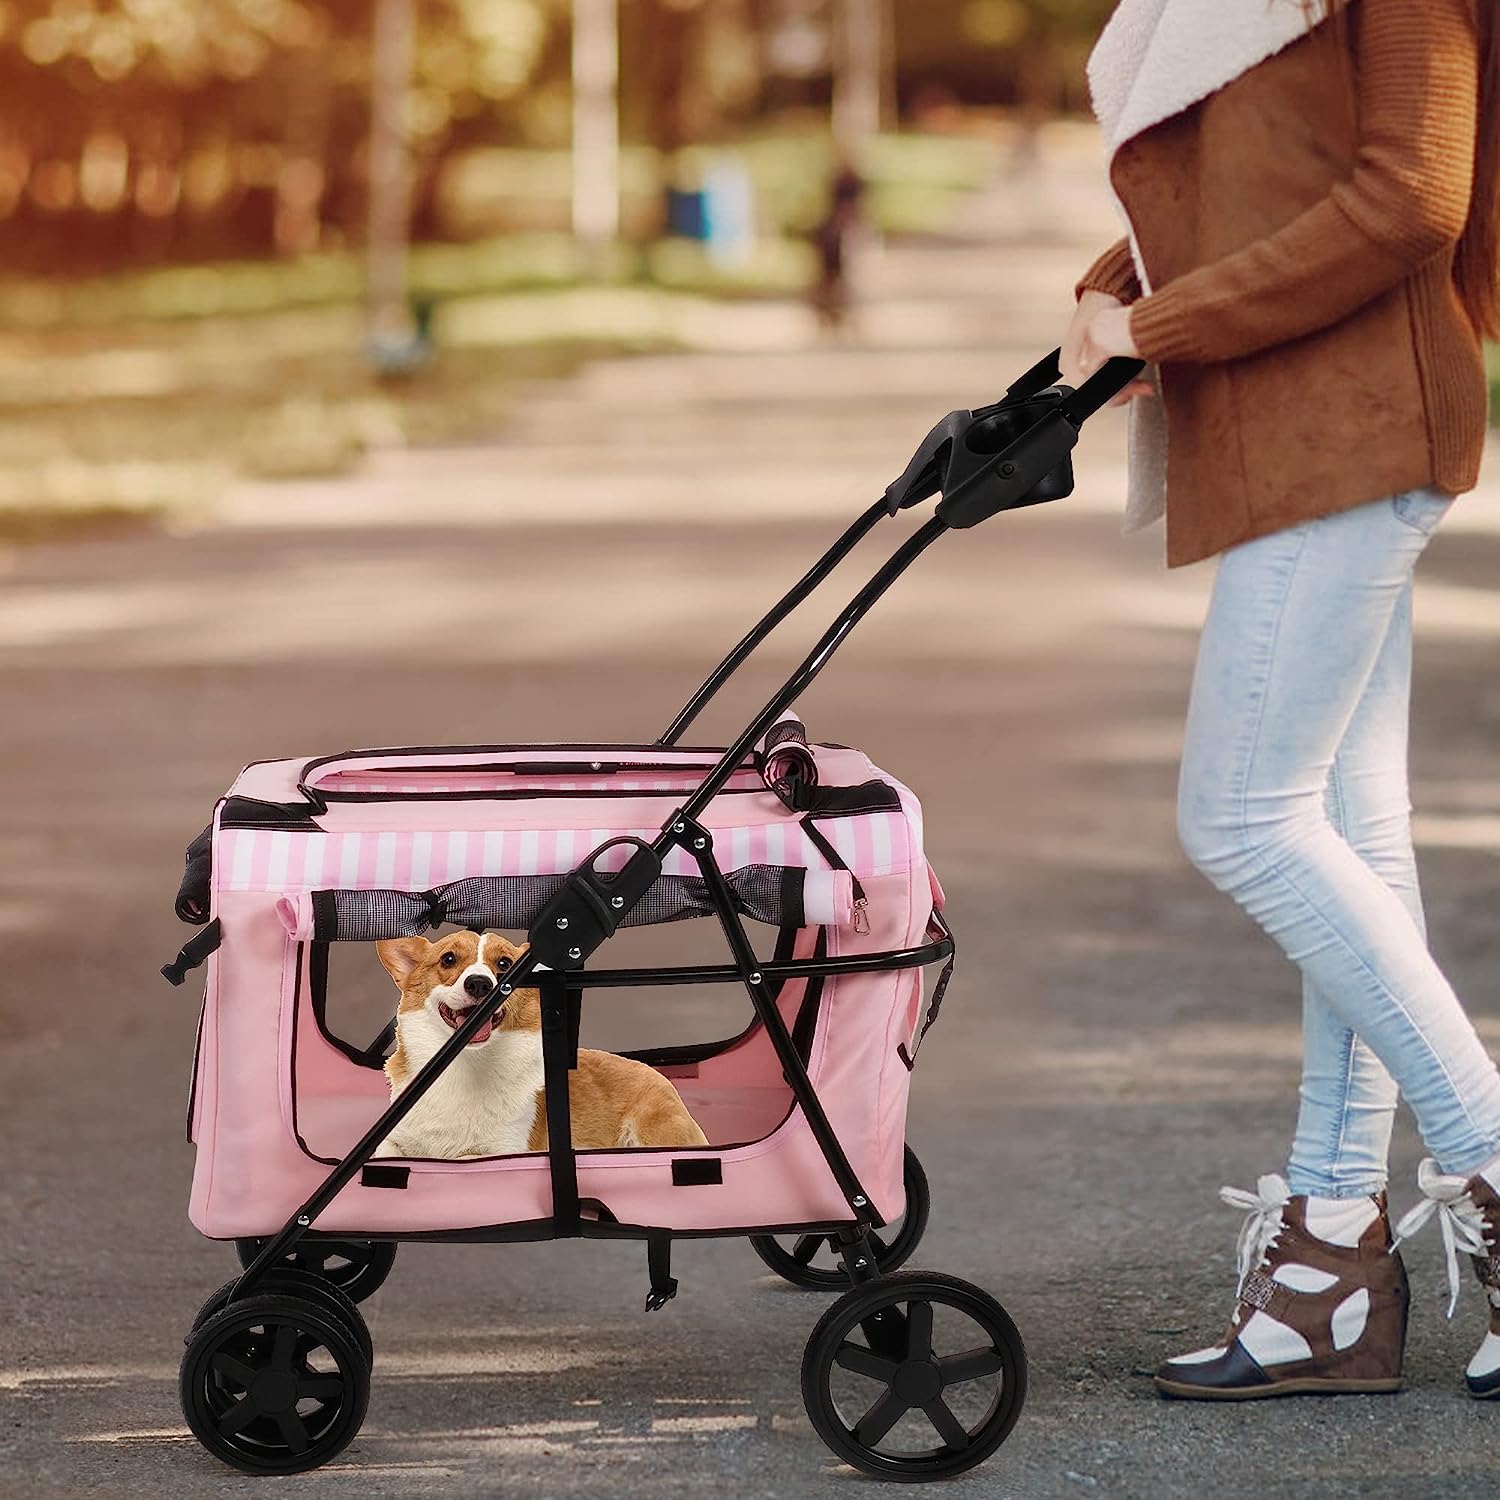 LUCKYERMORE 3-in-1 Folding Travel Carriers Dog Pet Stroller Pet Gear Stroller with Water Cup Holder, Pink